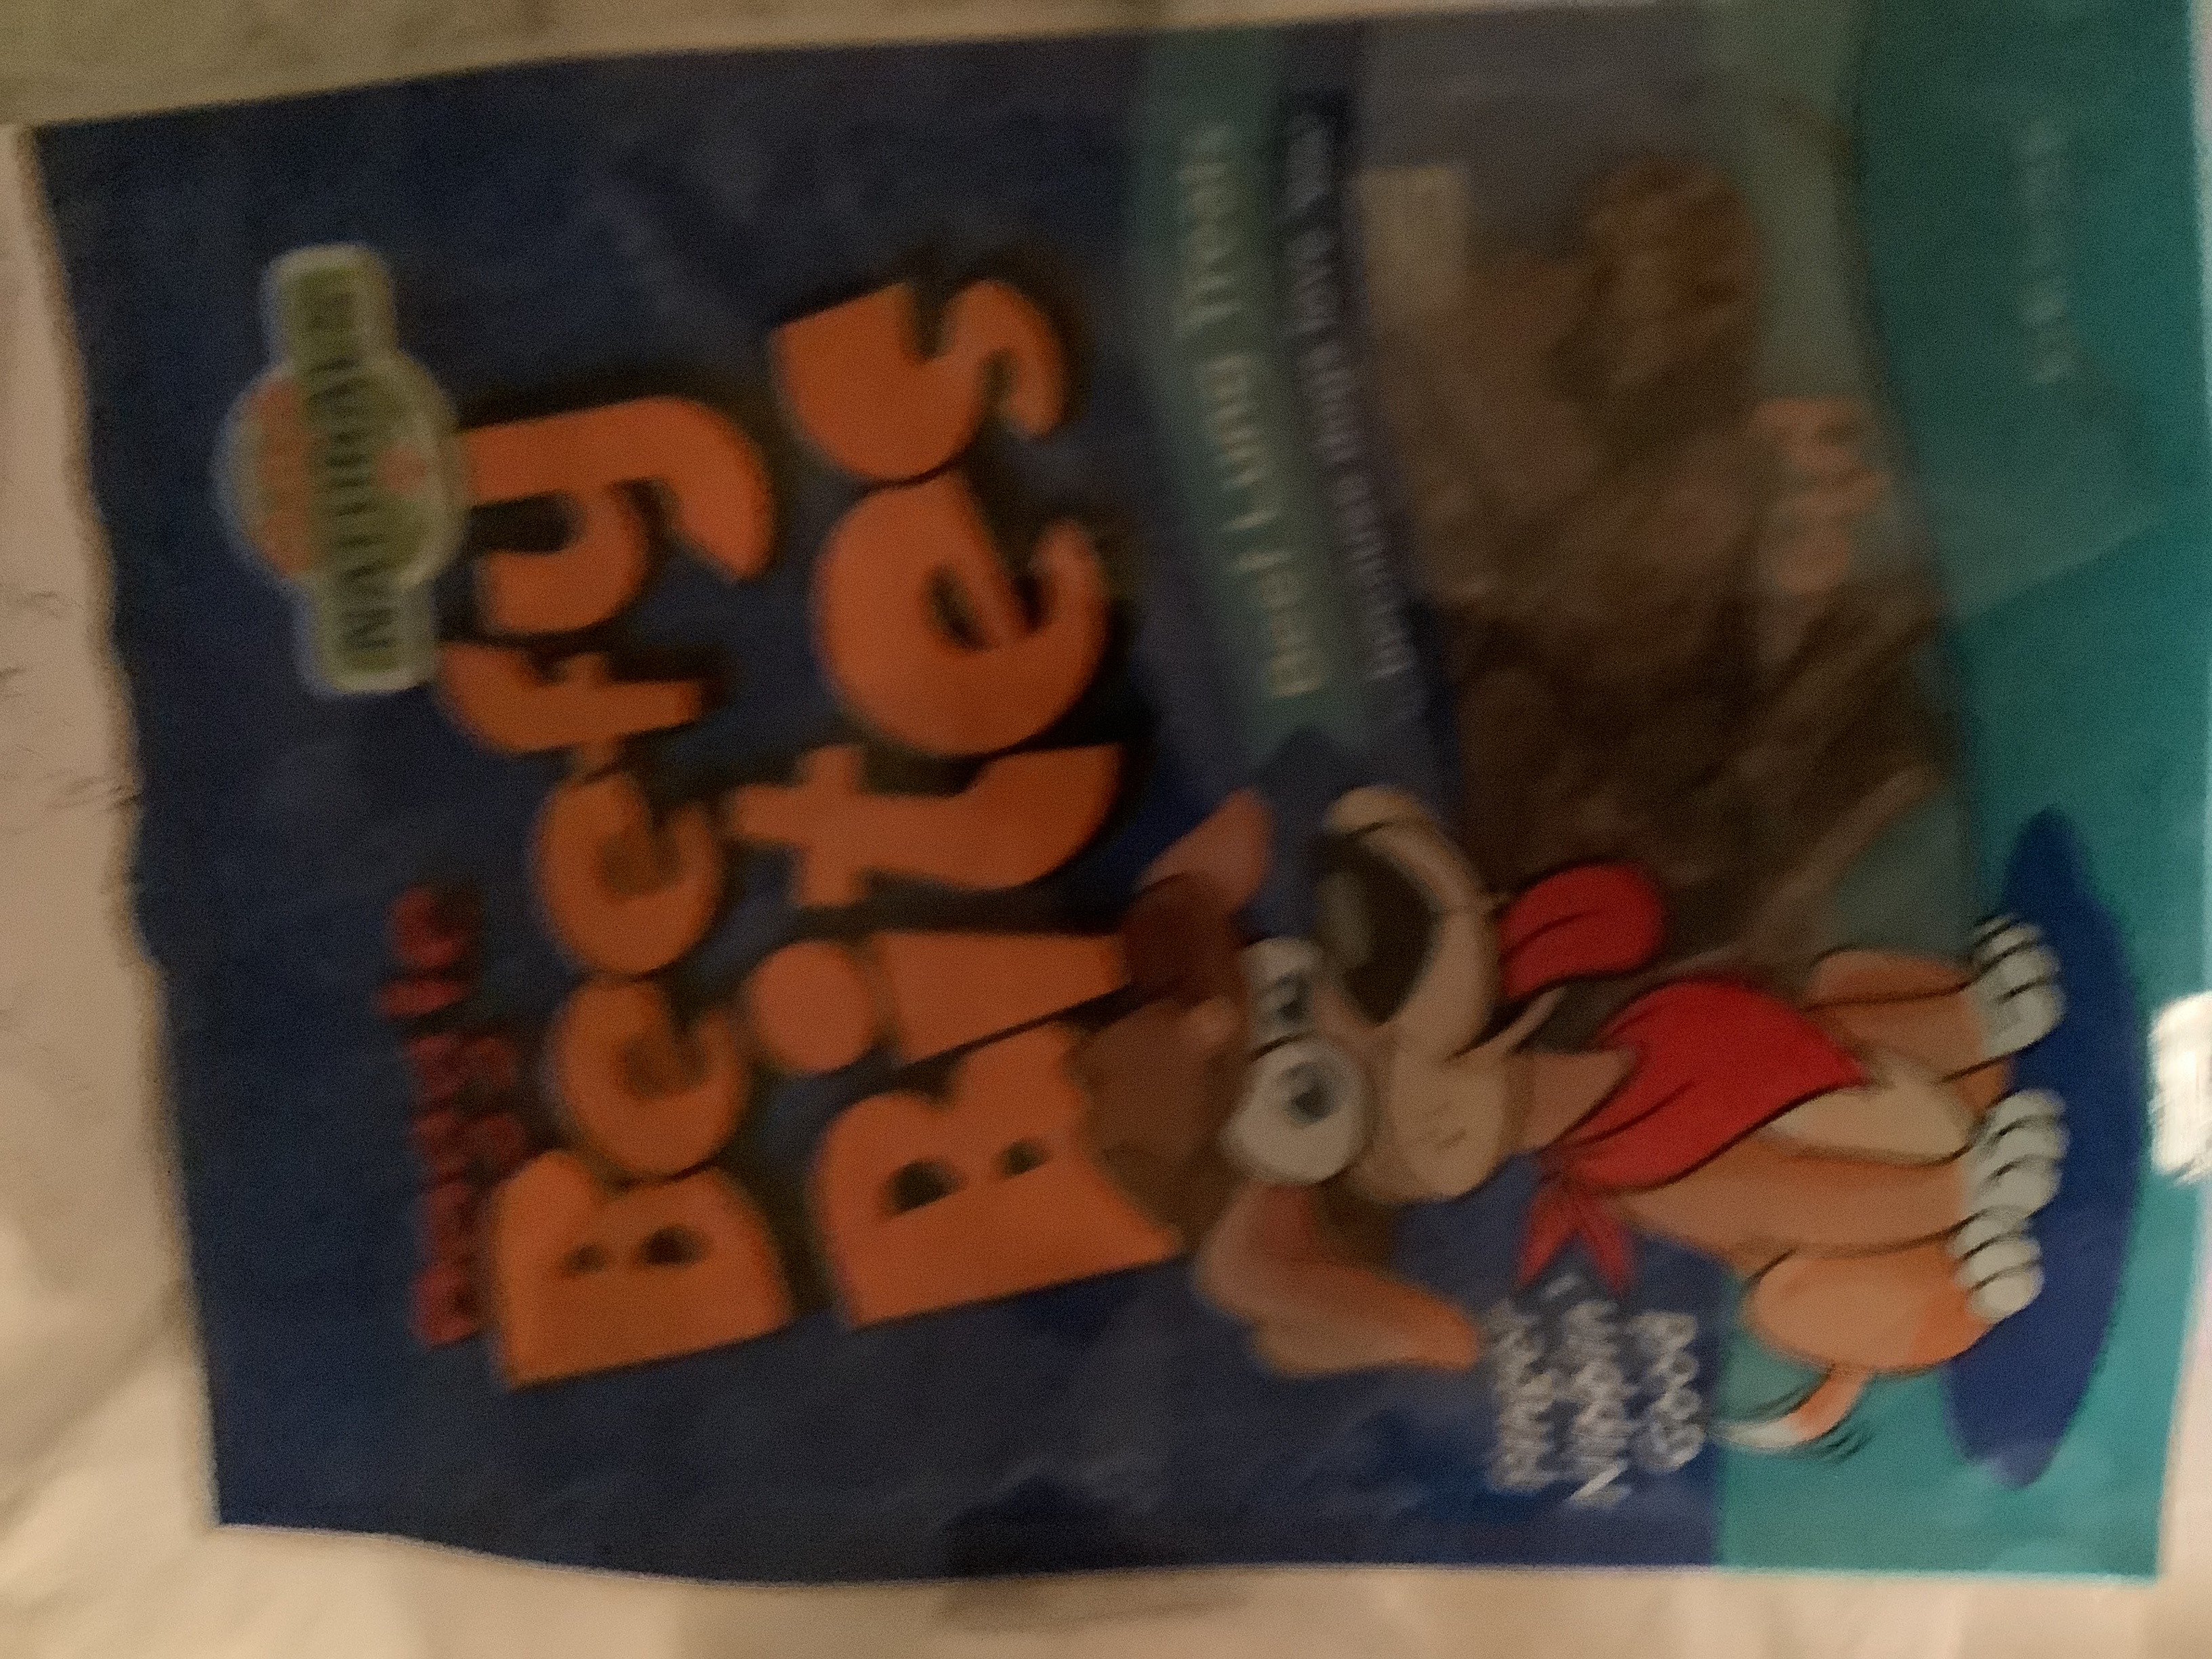 Chip's Naturals Doggie Beefy Bites Dog Treat - Review Image 1